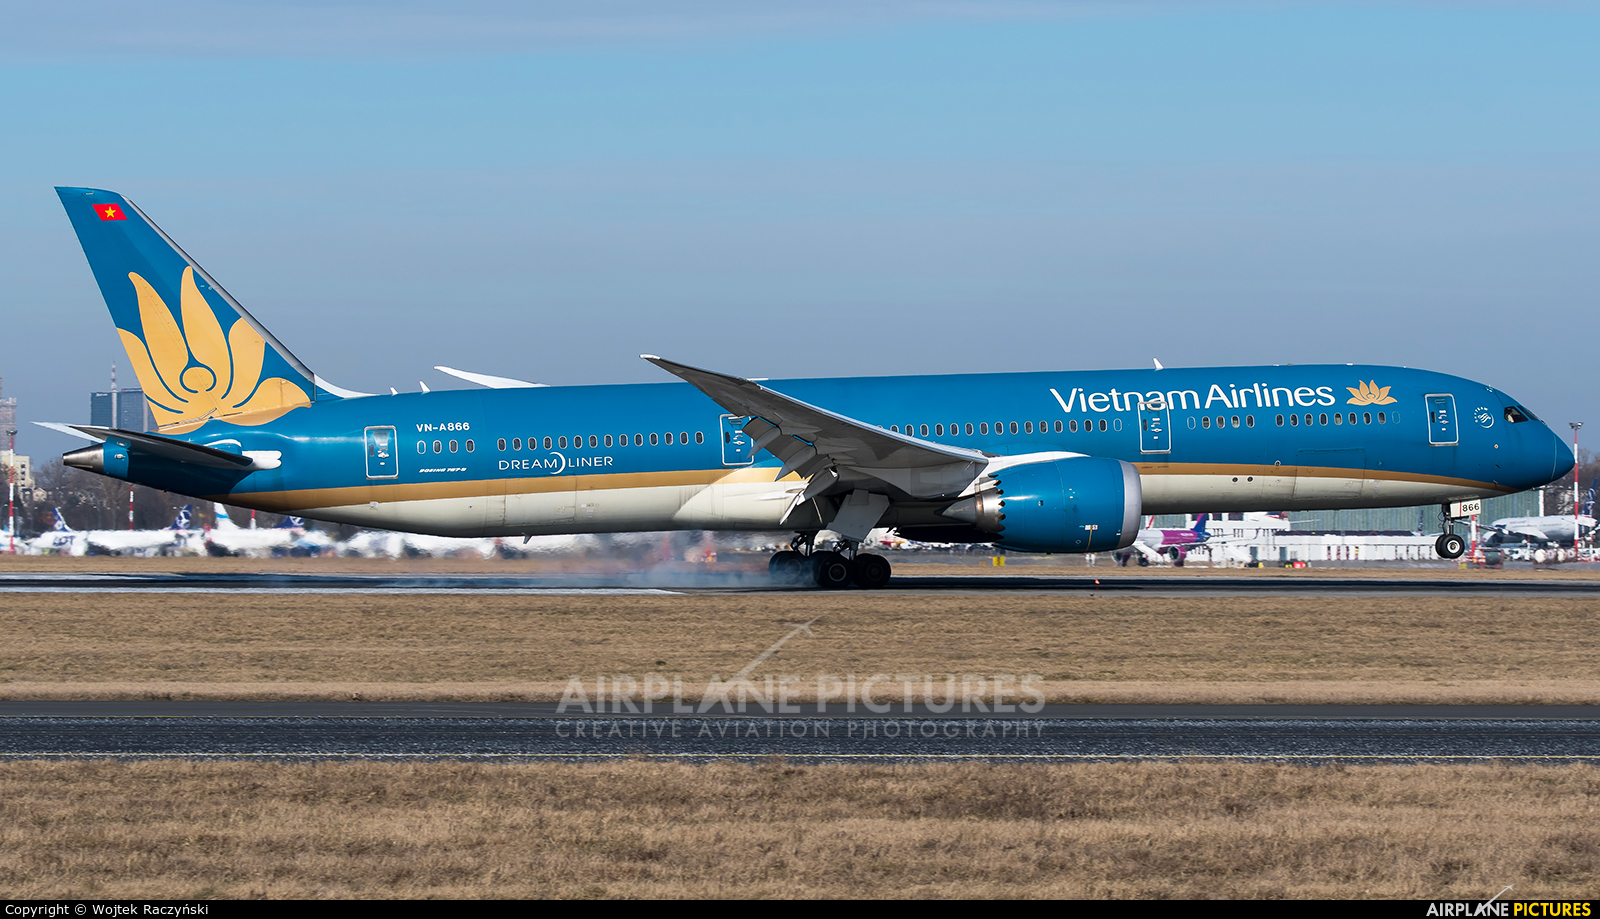 Vietnam Airlines VN-A866 aircraft at Warsaw - Frederic Chopin